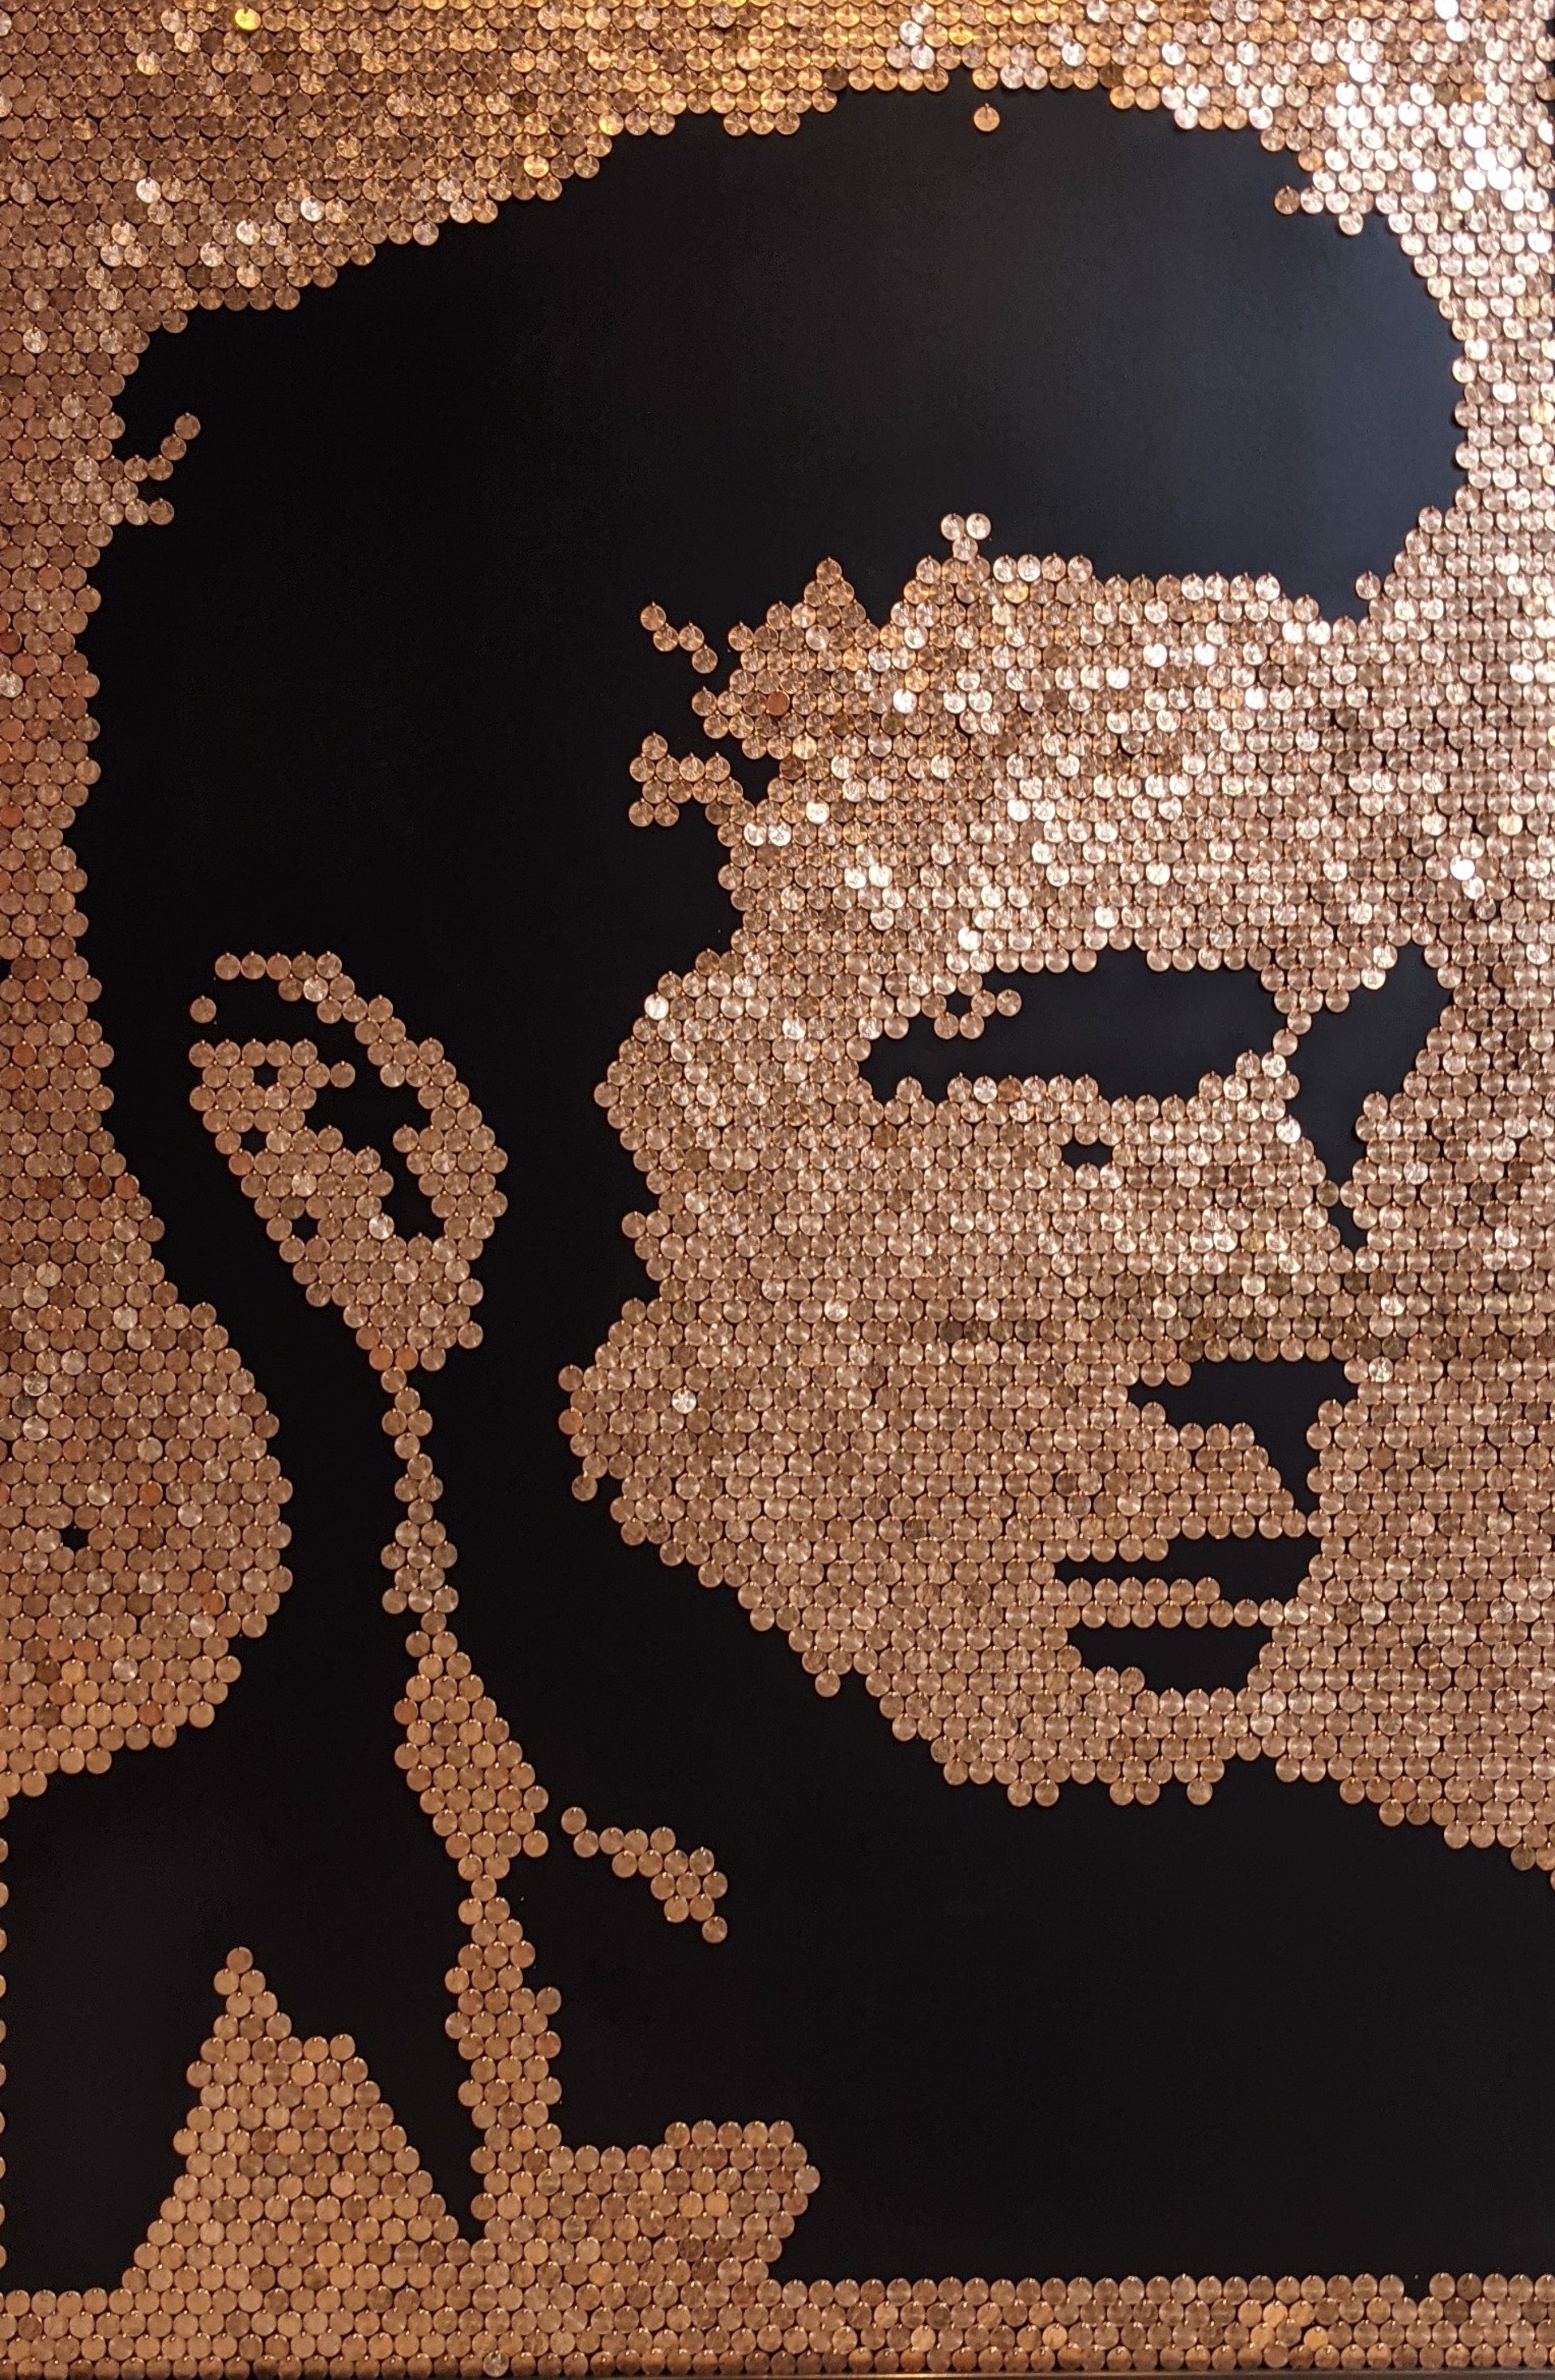 Penny Face "Johnny Cash" by "Coins & Sequins On Canvas" by Efi Mashiah